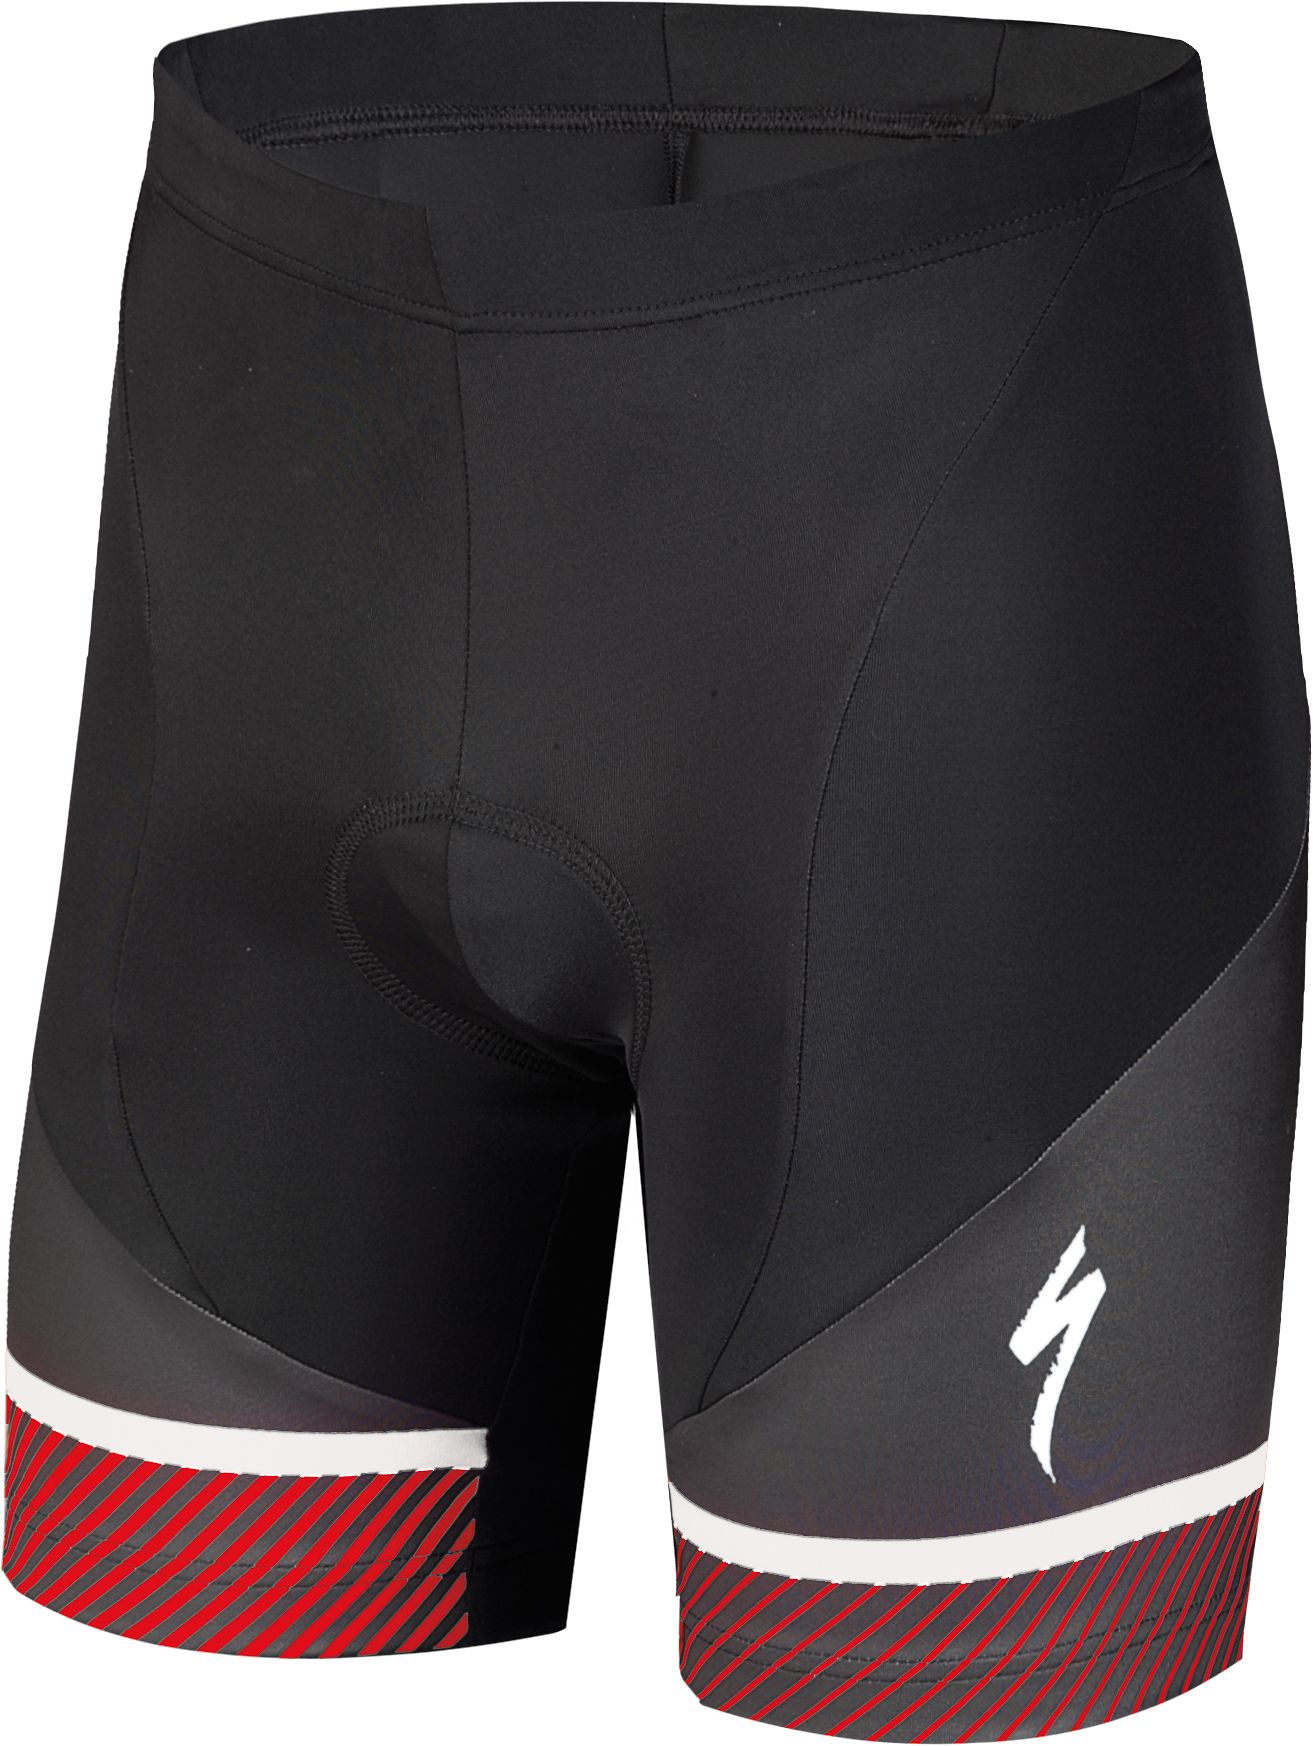 Specialized Rbx Comp Logo Youth Shorts 2018 - £15.99 | Childrens ...